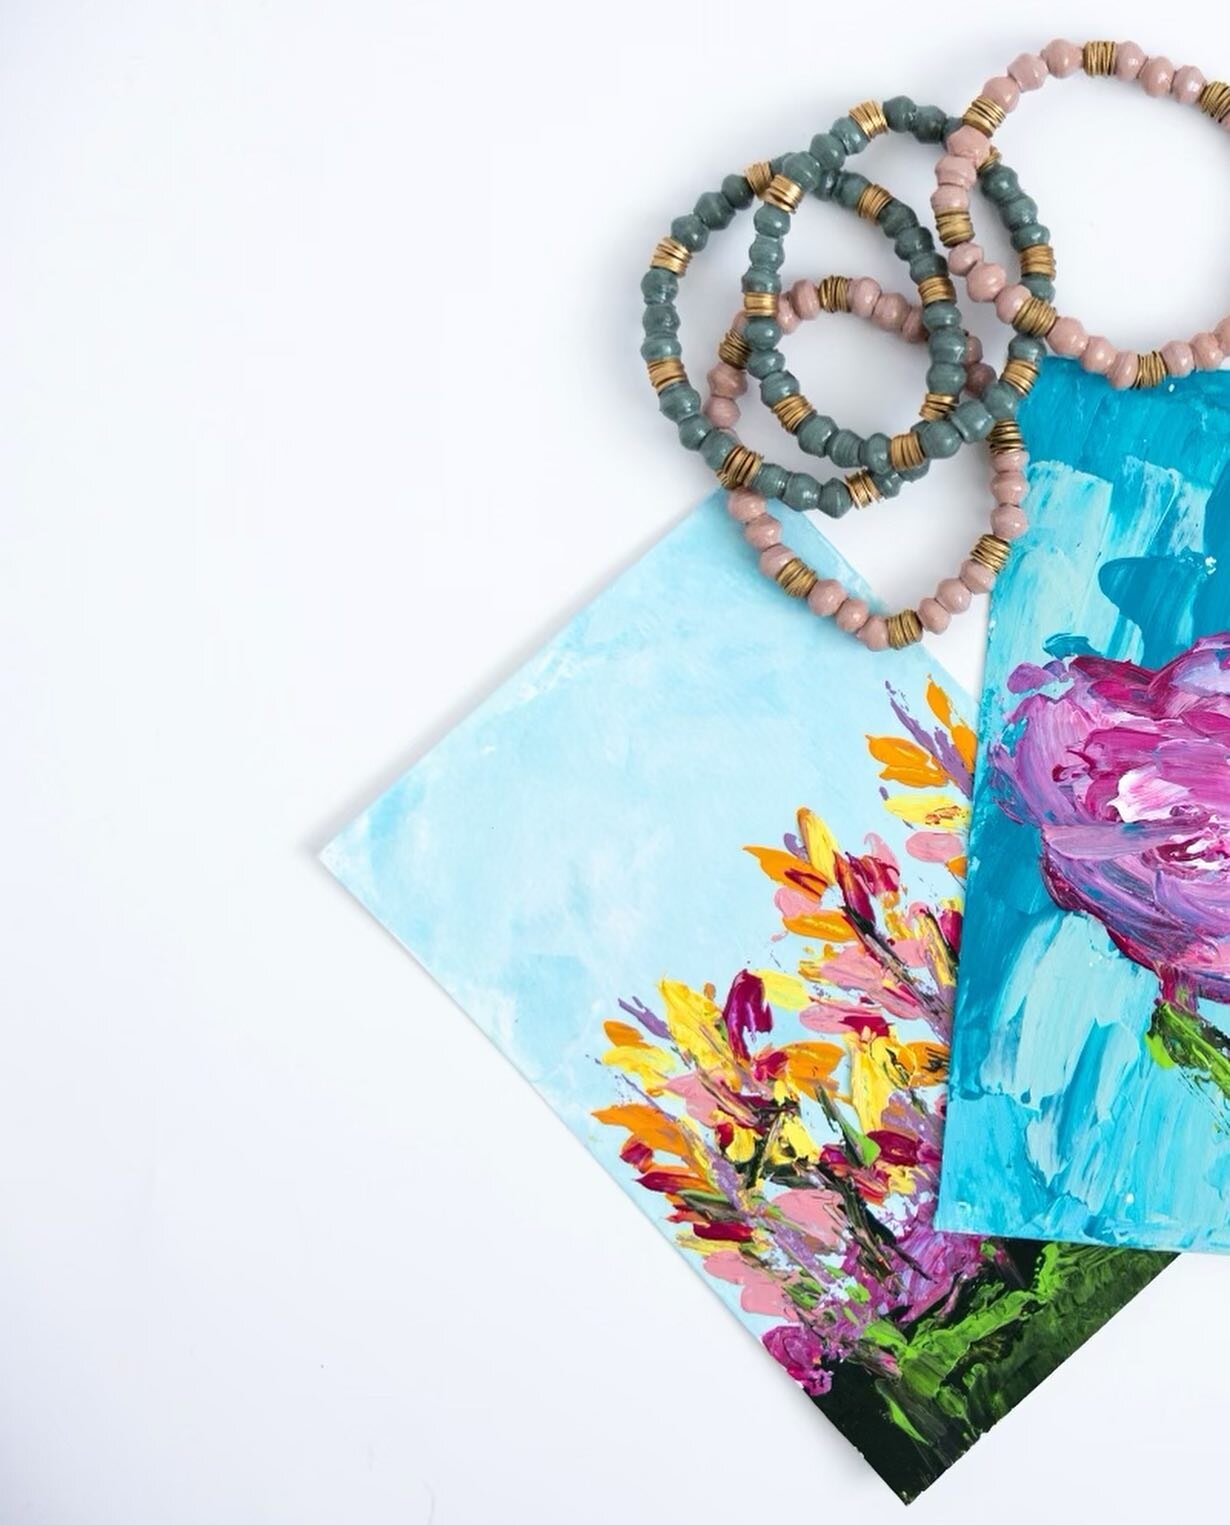 Spring into summer with these amazing art designs made my @artistictherapy19 and also our amazing artisans in Rwanda. ✨

🌸Great for framing to add a pop of color to your home or office! 

#springflowers #postcards #artist #handmadegifts